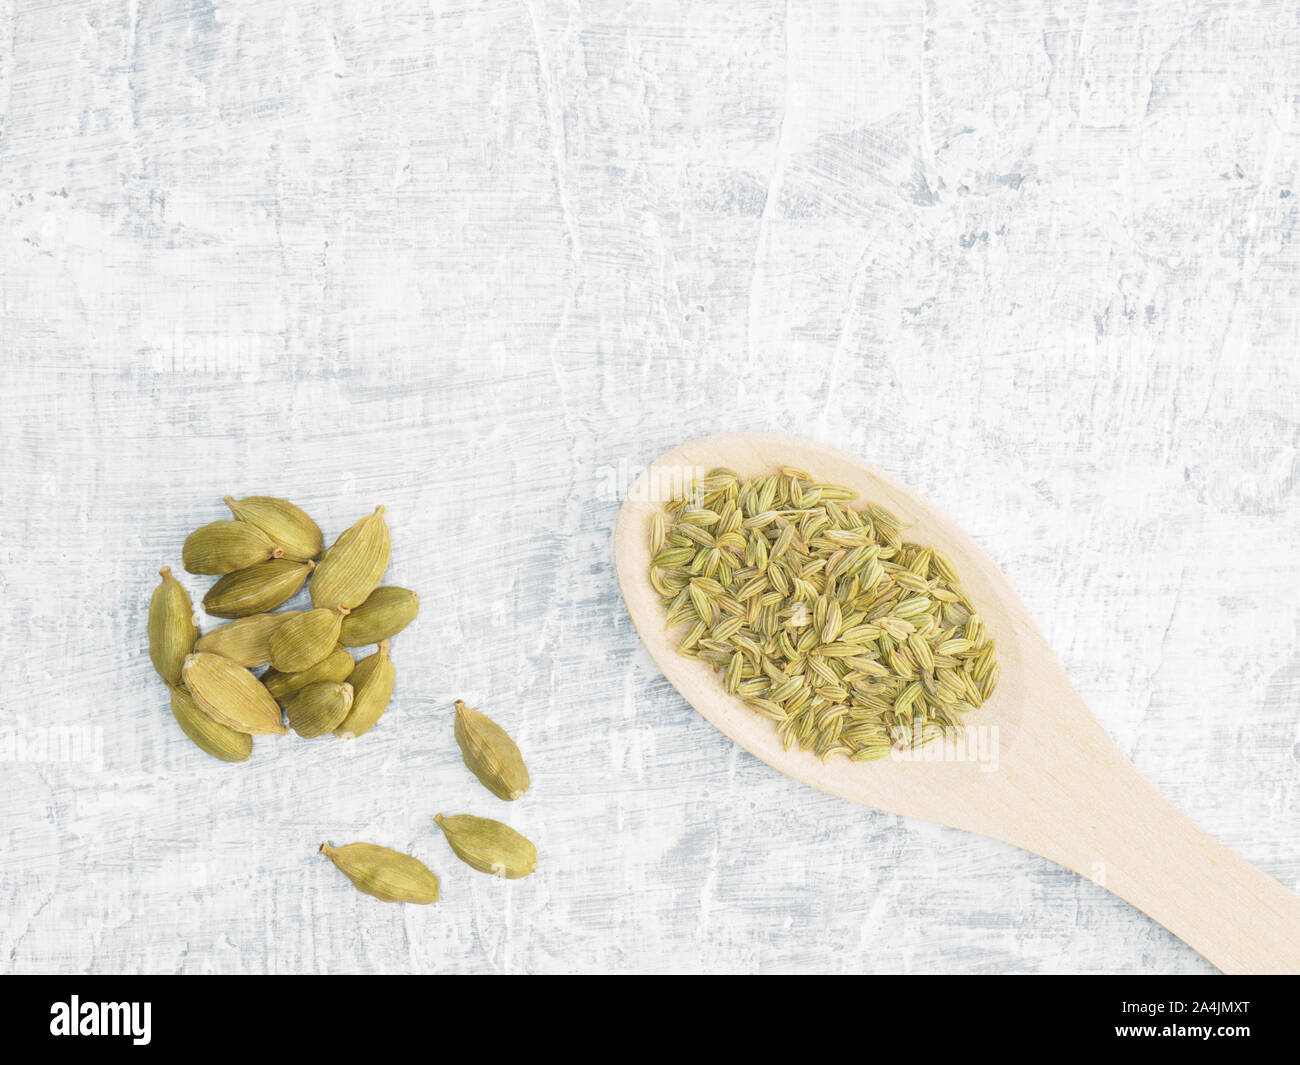 Spices and herbs help maintain good health and improve appetite, top view on white concrete background. Fennel in wooden spoon, green cardamom. Modern Stock Photo